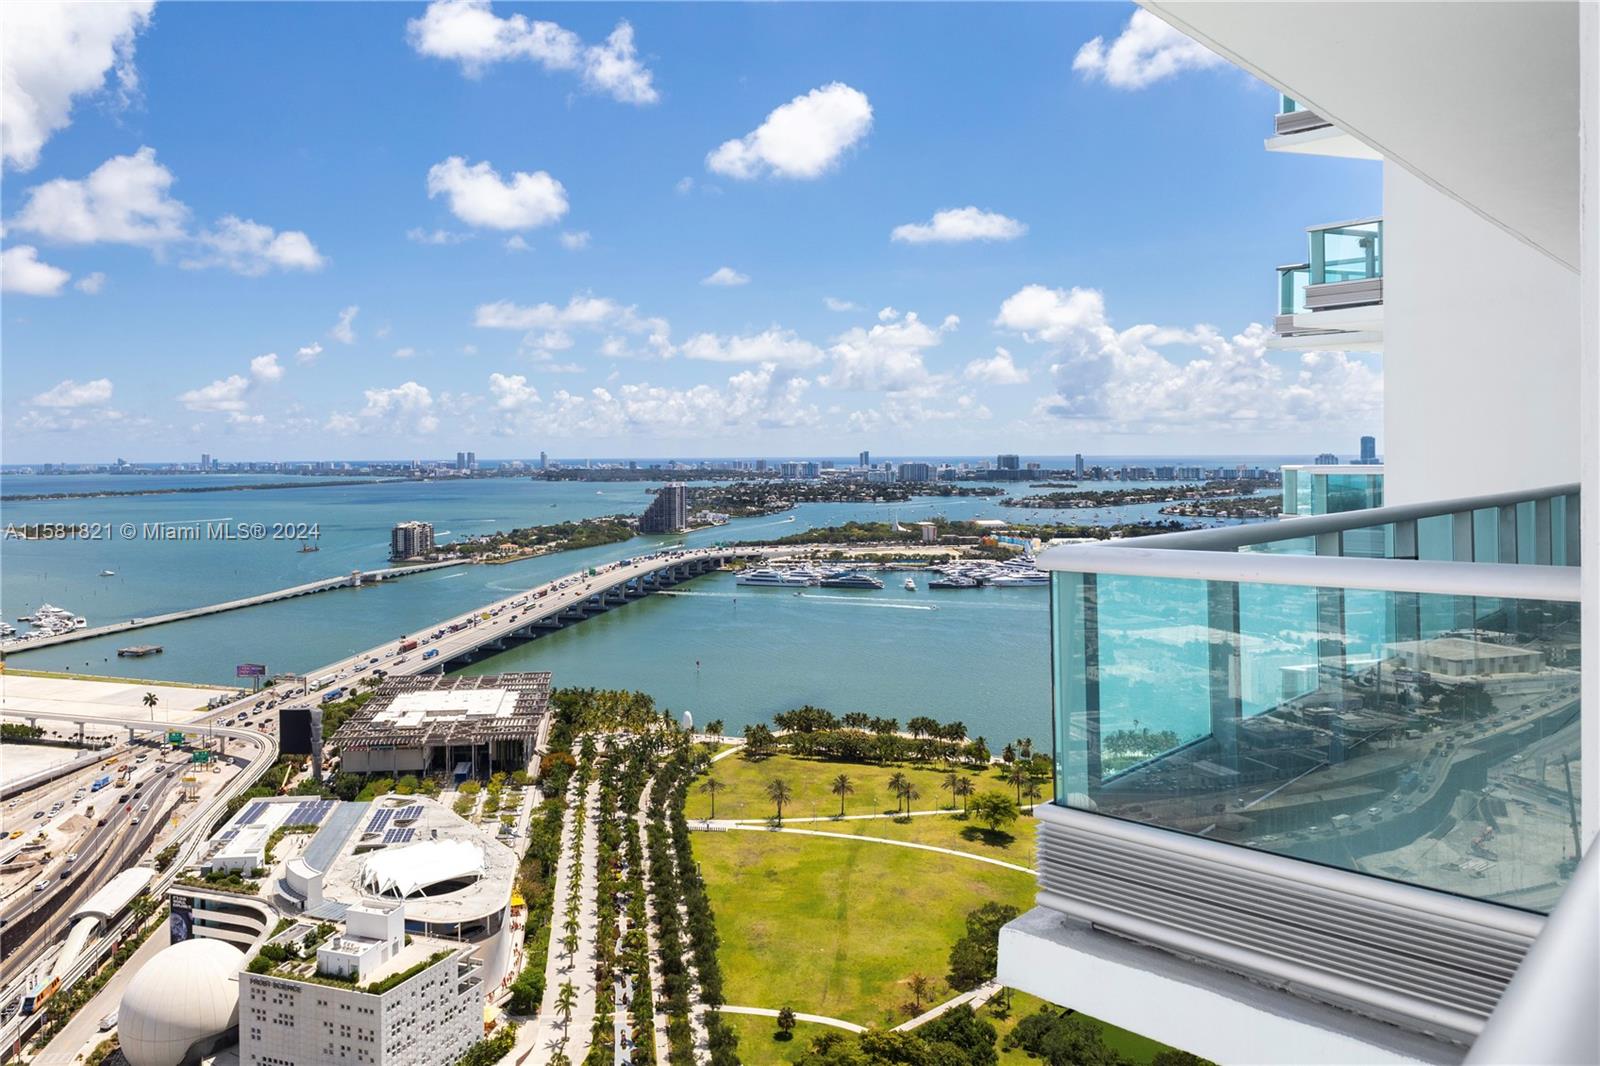 Move-in ready condo located on the 42nd floor of the prestigious 900 Biscayne in downtown. Boasting breathtaking water views, unit features tile throughout, 2 balconies, a Den that can be converted into a second bedroom with a  full bathroom next to it. Modern kitchen equipped with high-end appliances and ample storage space. The bedroom includes an ensuite bathroom, walk-in closet, and a private balcony. As a resident, indulge in a wealth of luxurious amenities, including a fitness center, 2 pools, clubhouse, conference center, billiard and TV lounge, piano bar, screening room, spa, sauna and steam room. 
Live walking distance from Miami World Center, parks, museums, Art District and Miami Heat Arena, surrounded by world-class dining, only 15 minutes from the MIA Airport and beaches.